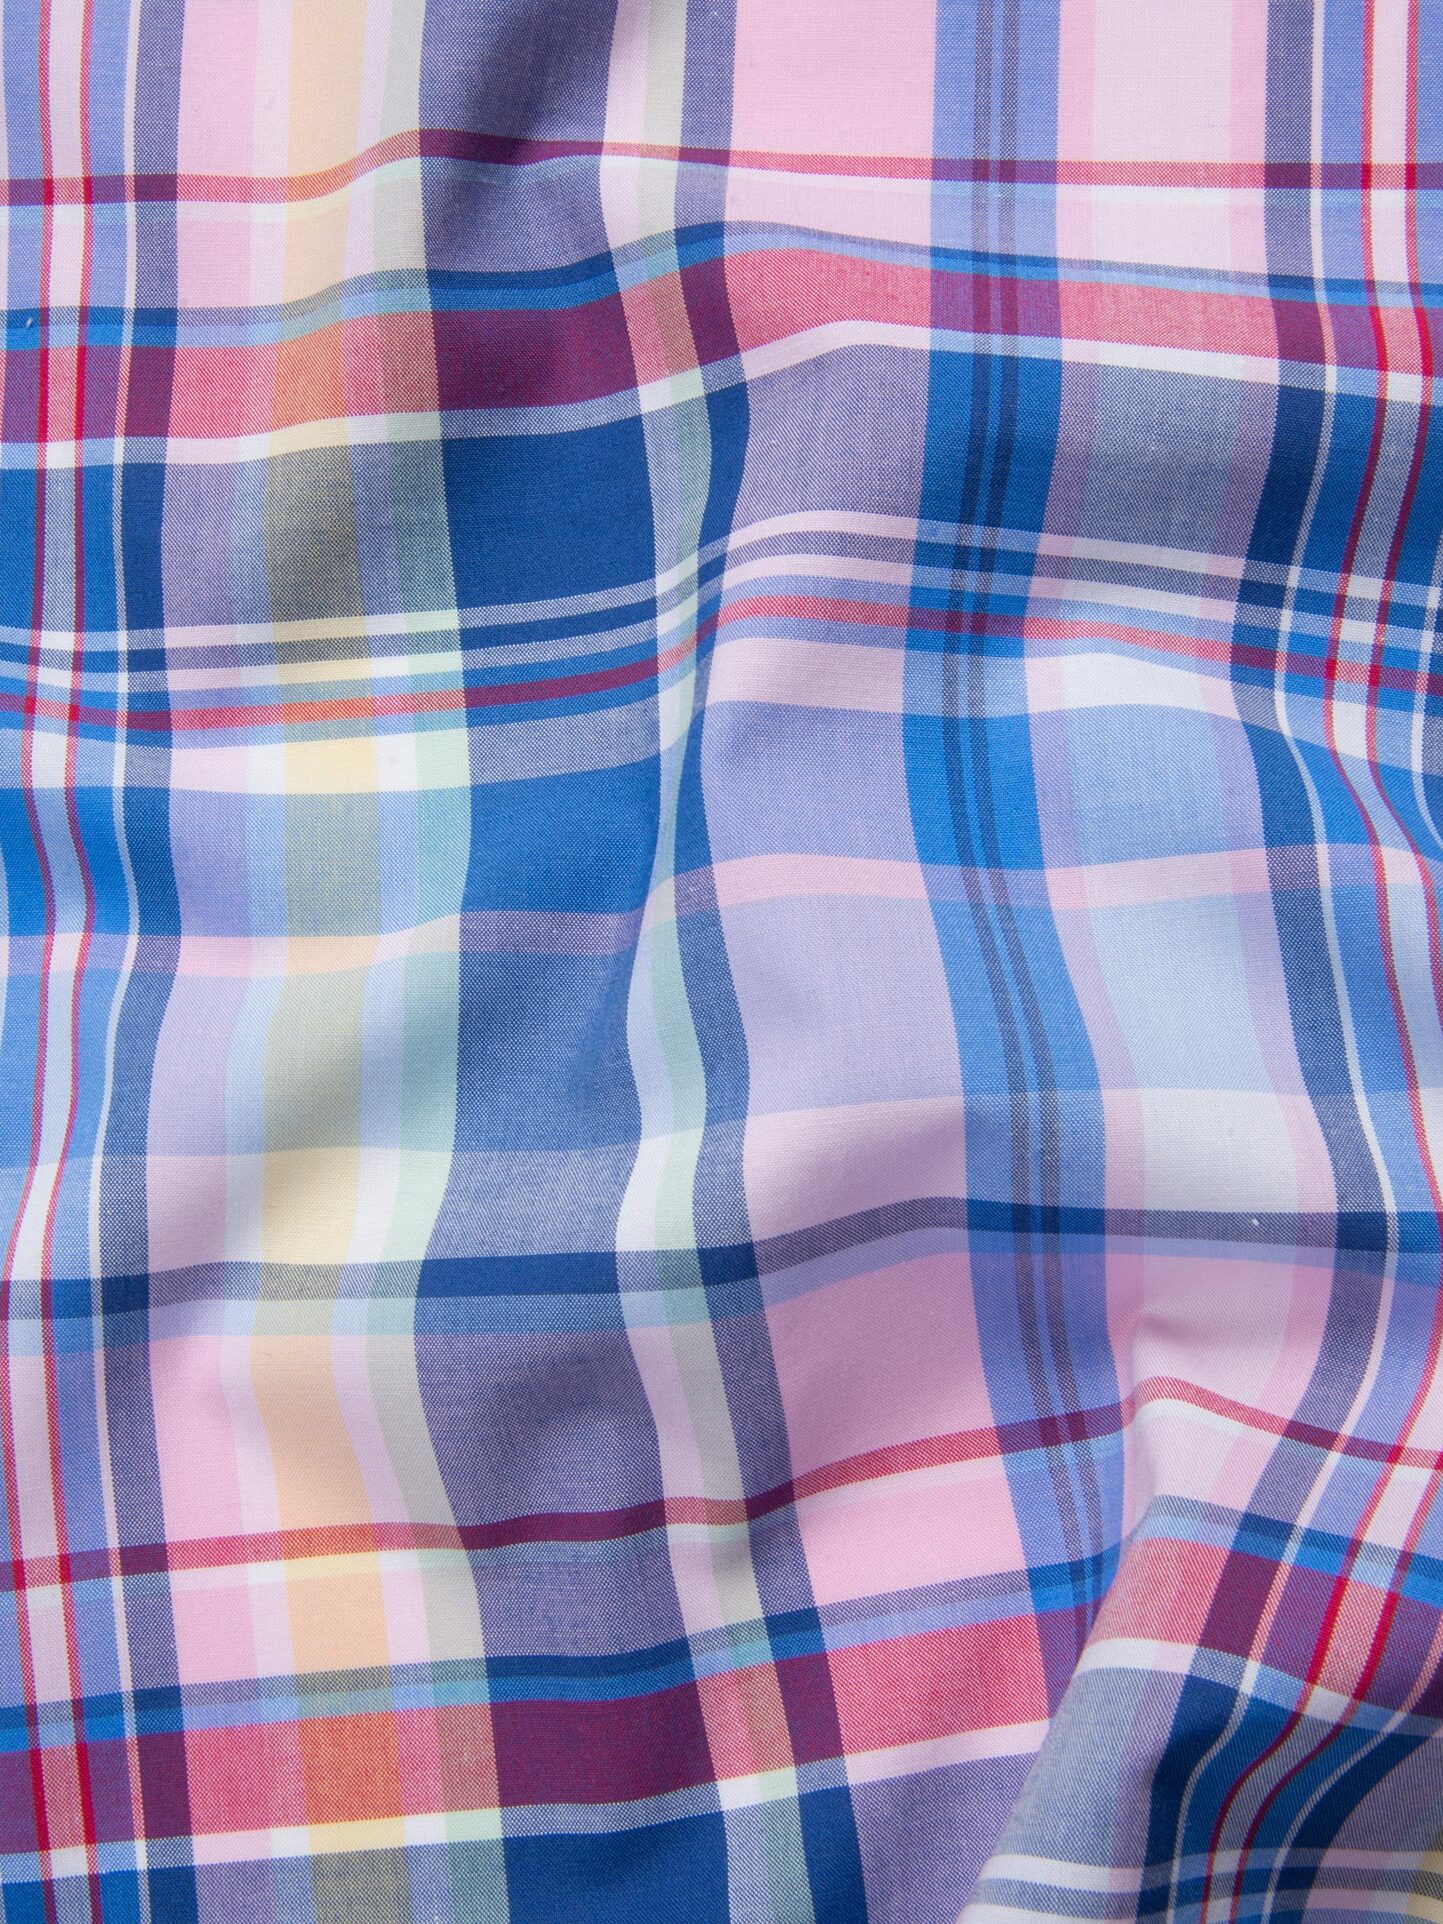 Pink Blue Red Madras Shirts by Proper Cloth